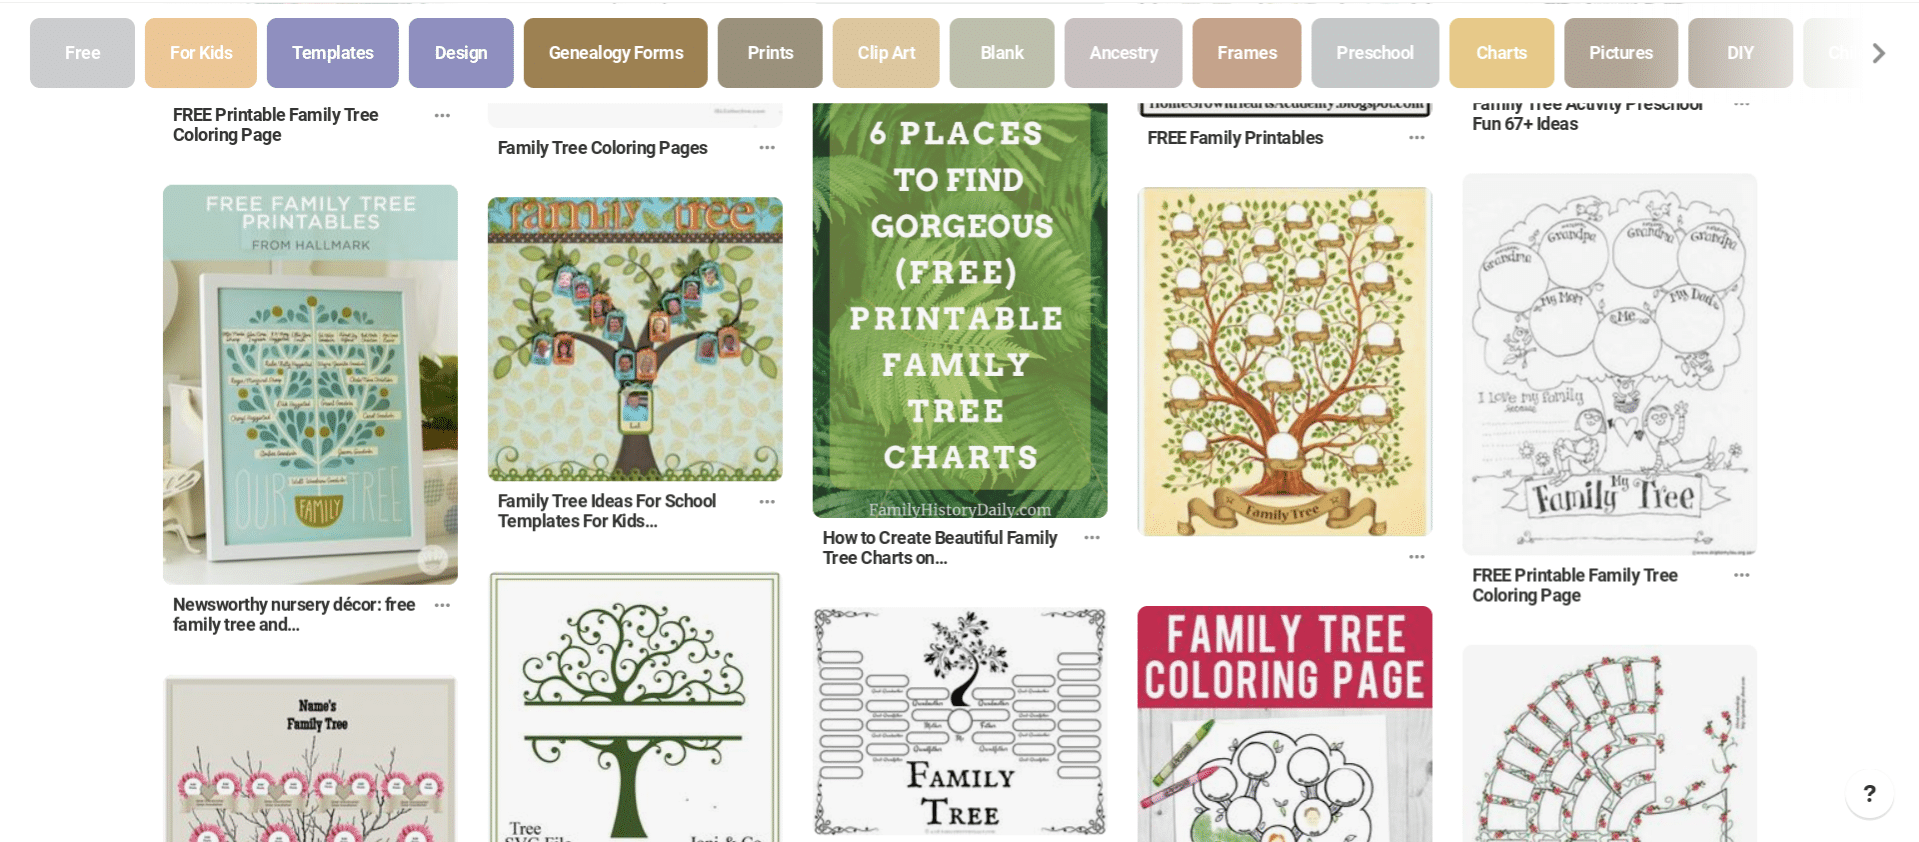 10 Places to Find the Free Genealogy Printables You Need